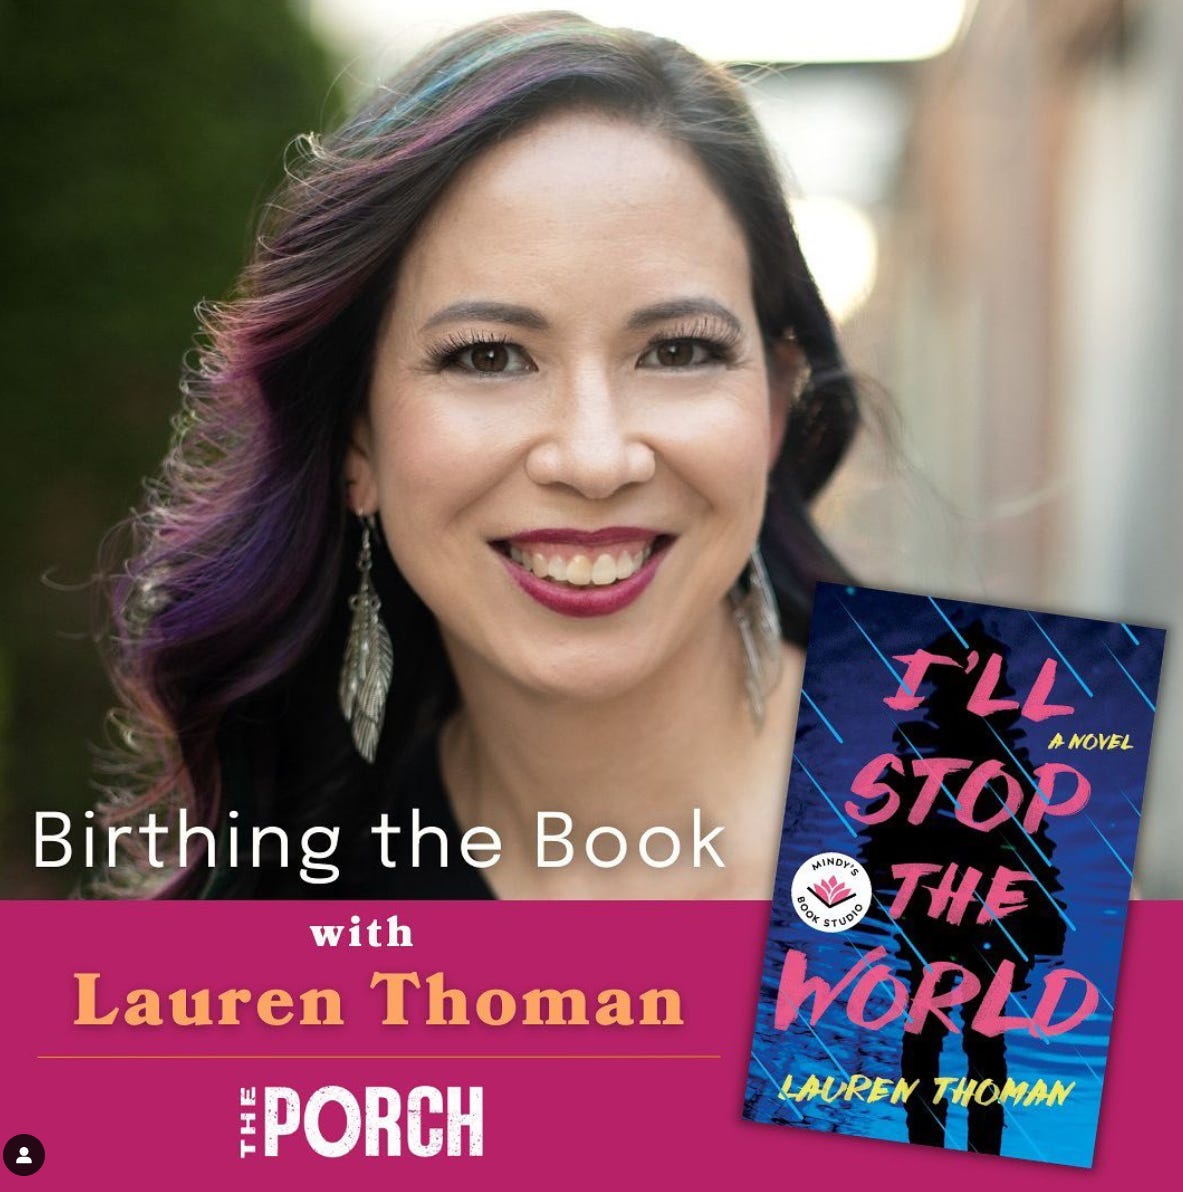 https://www.porchtn.org/happenings/birthing-the-book-a-conversation-with-lauren-thoman